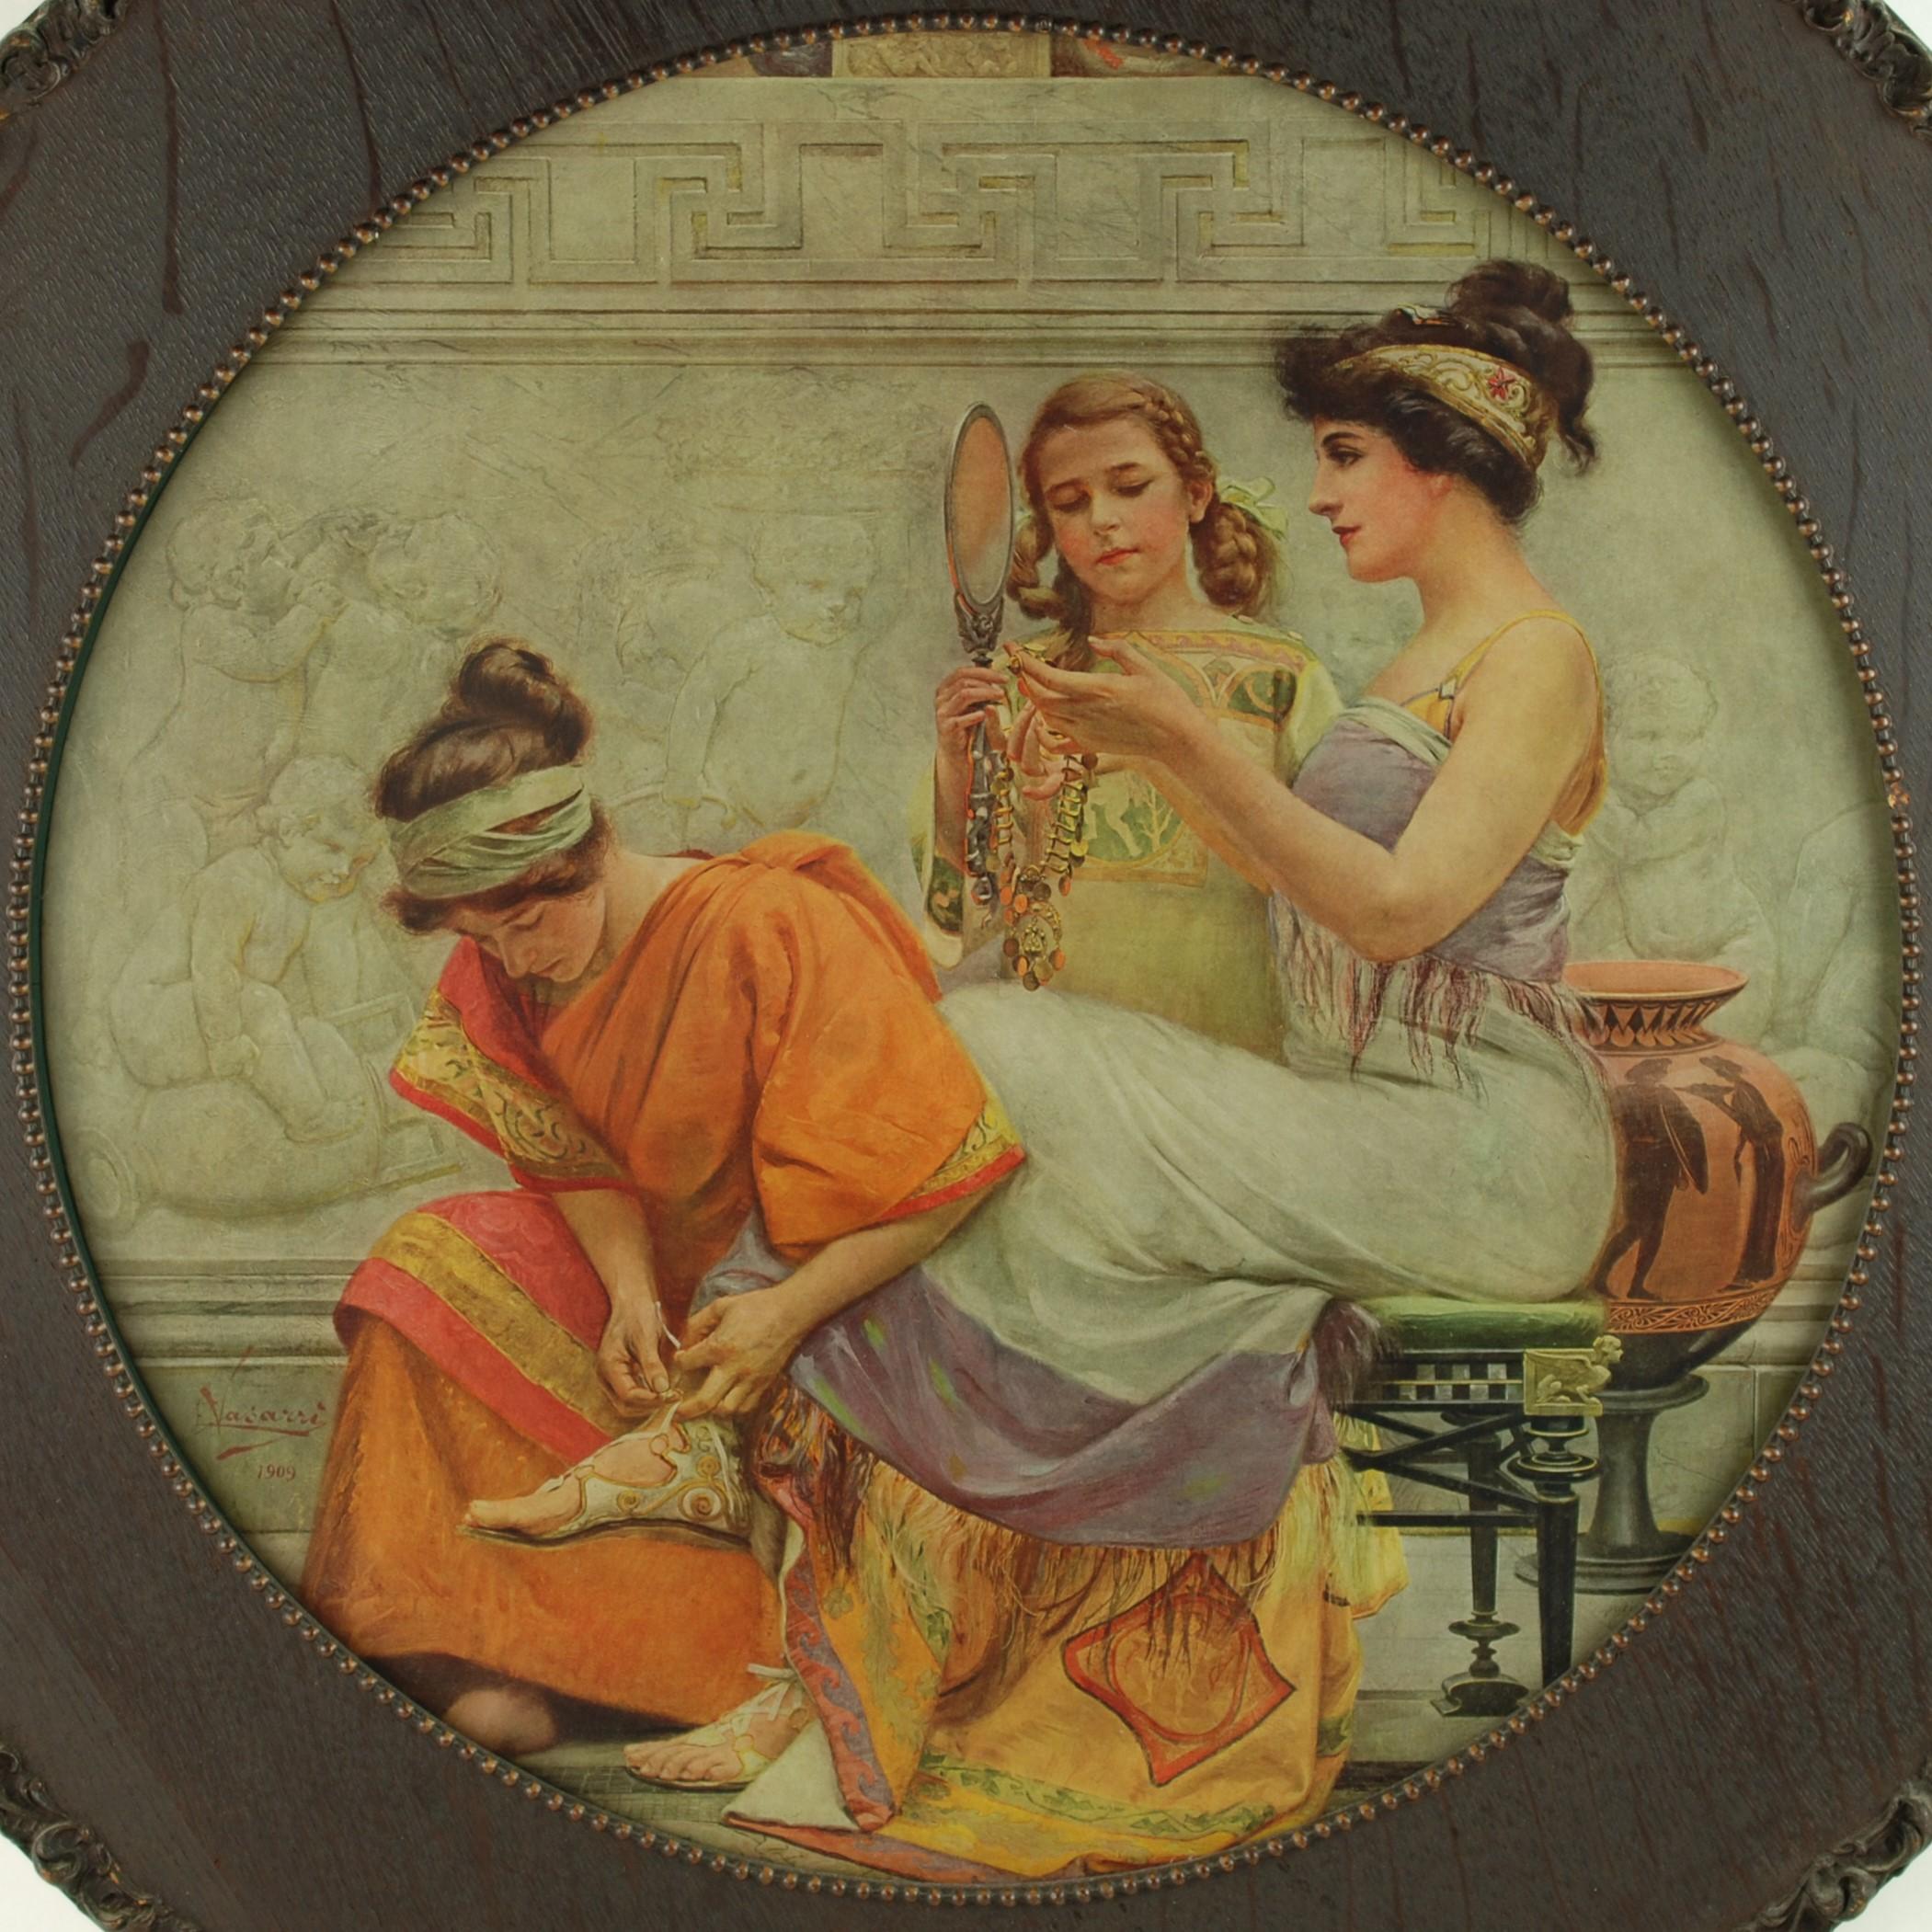 This rare early 20th century lithograph depicts an image originally executed by Italian artist Emilio Vasarri in 1909. The piece features a scene from classical antiquity and depicts a seated noblewoman along with two attendants. The woman is in the